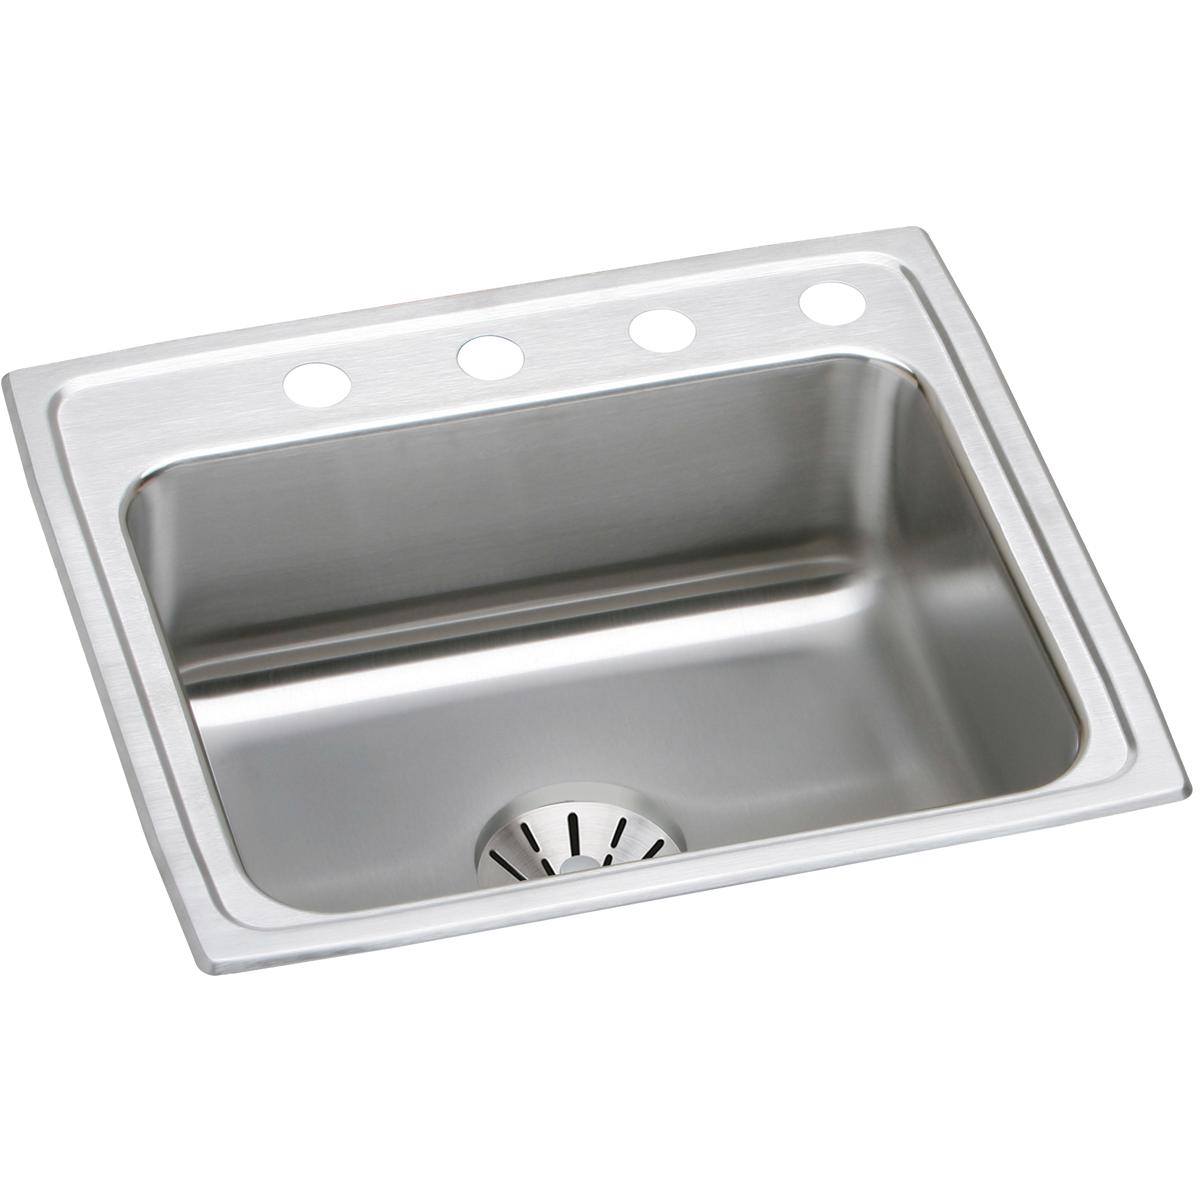 Elkay Lustertone Classic 22" x 19-1/2" x 10-1/8" Single Bowl Drop-in Stainless Steel Sink with Perfect Drain